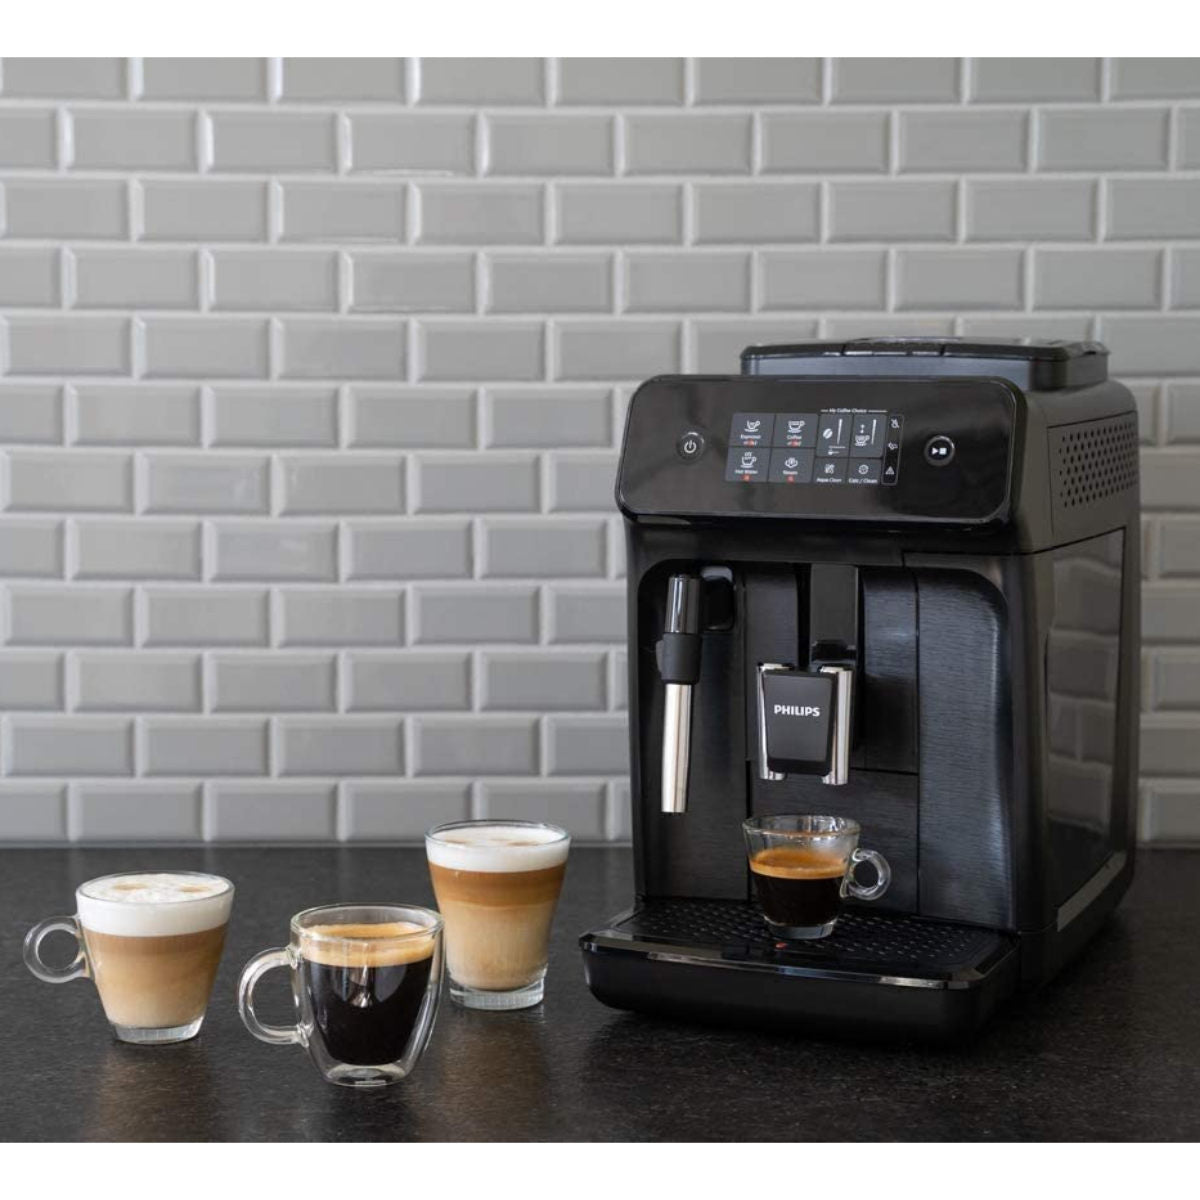 Philips 1200 Series Fully Automatic Espresso Maker With Milk